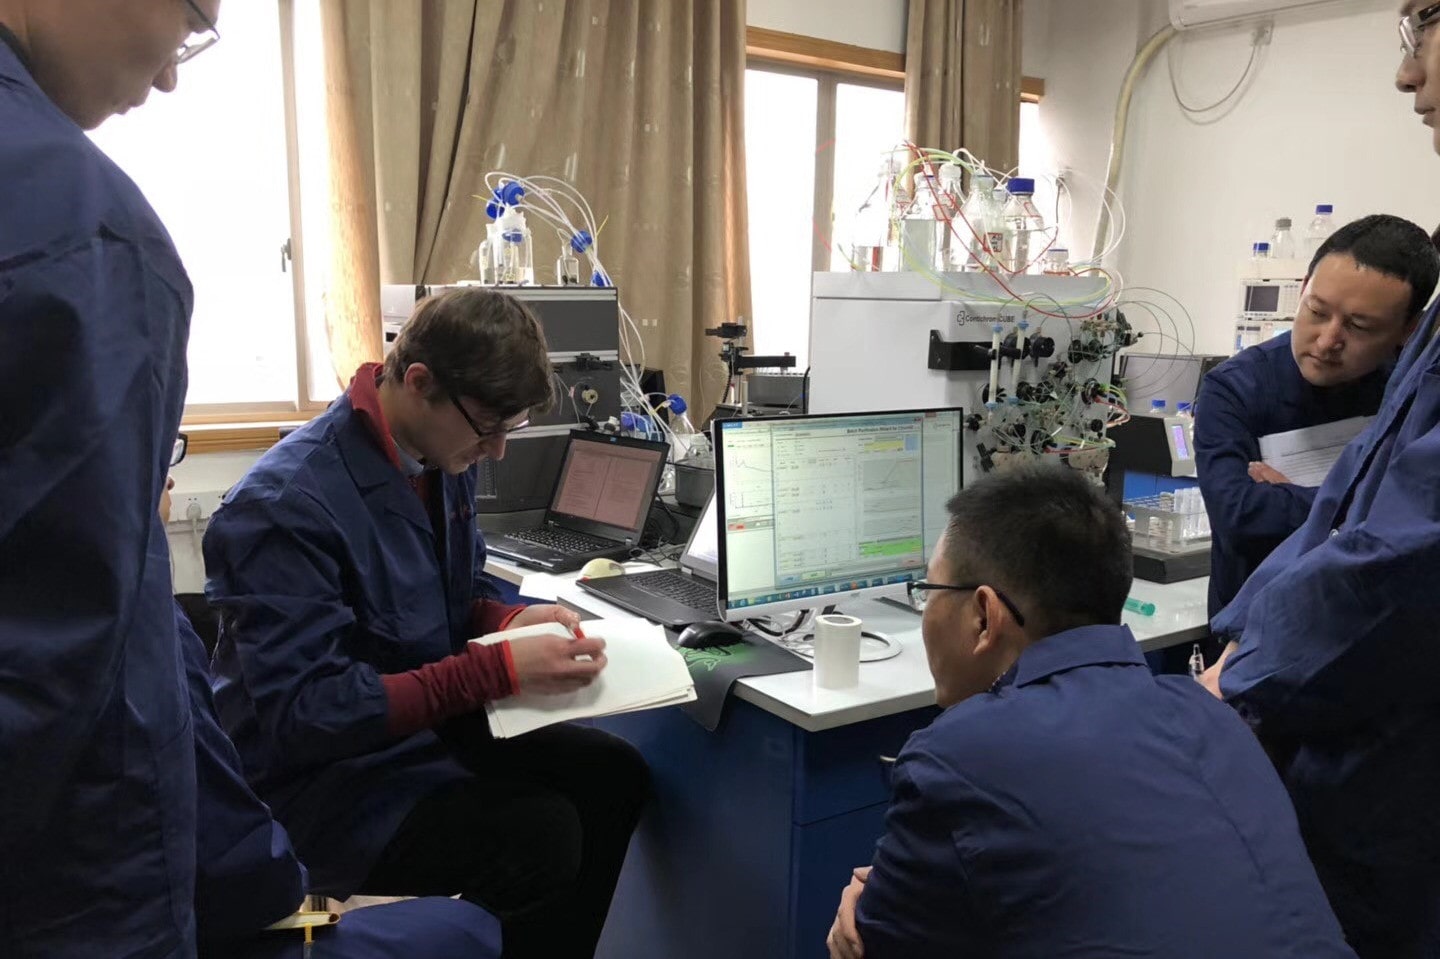 Chromacon training for continuous chromatography